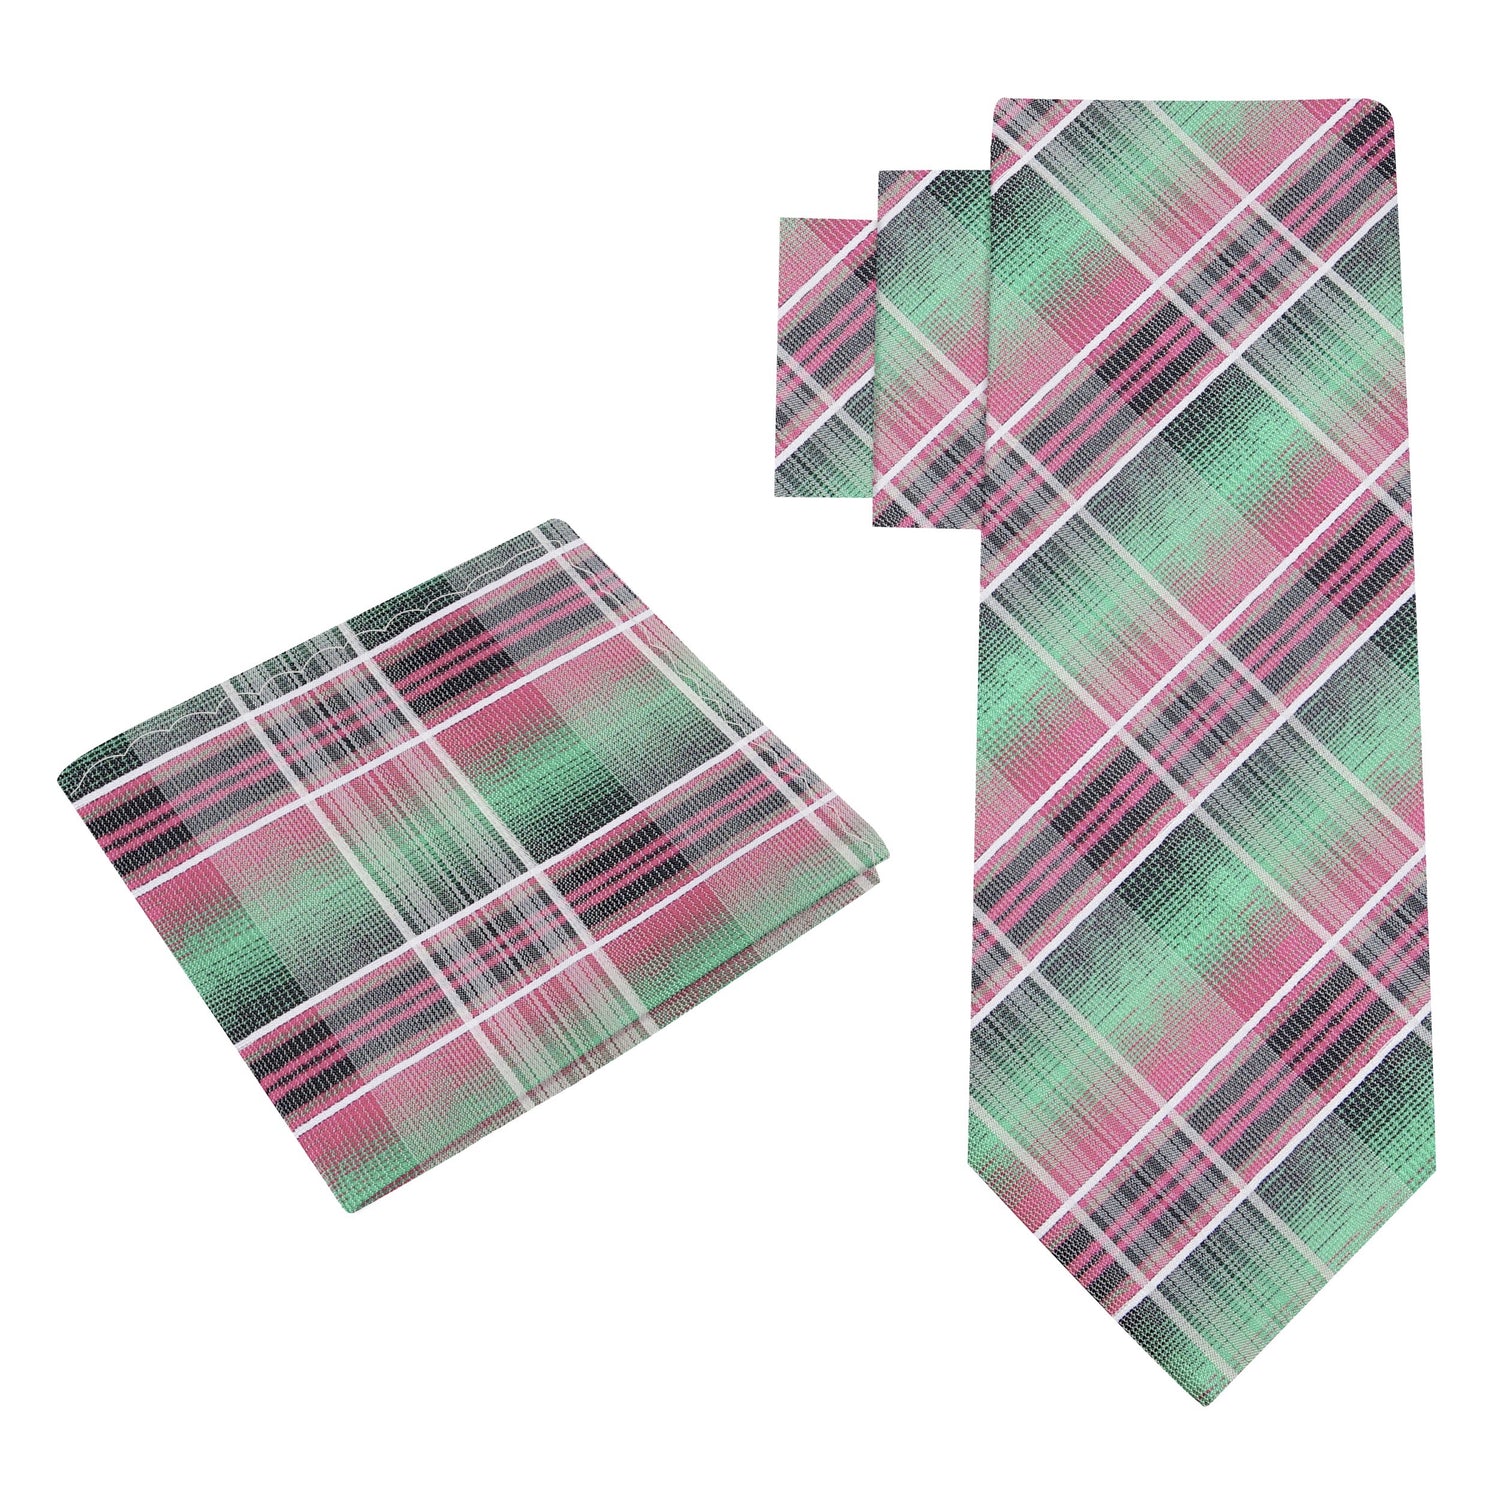 Alt View: Green, Pink and White Plaid Necktie and Matching Square